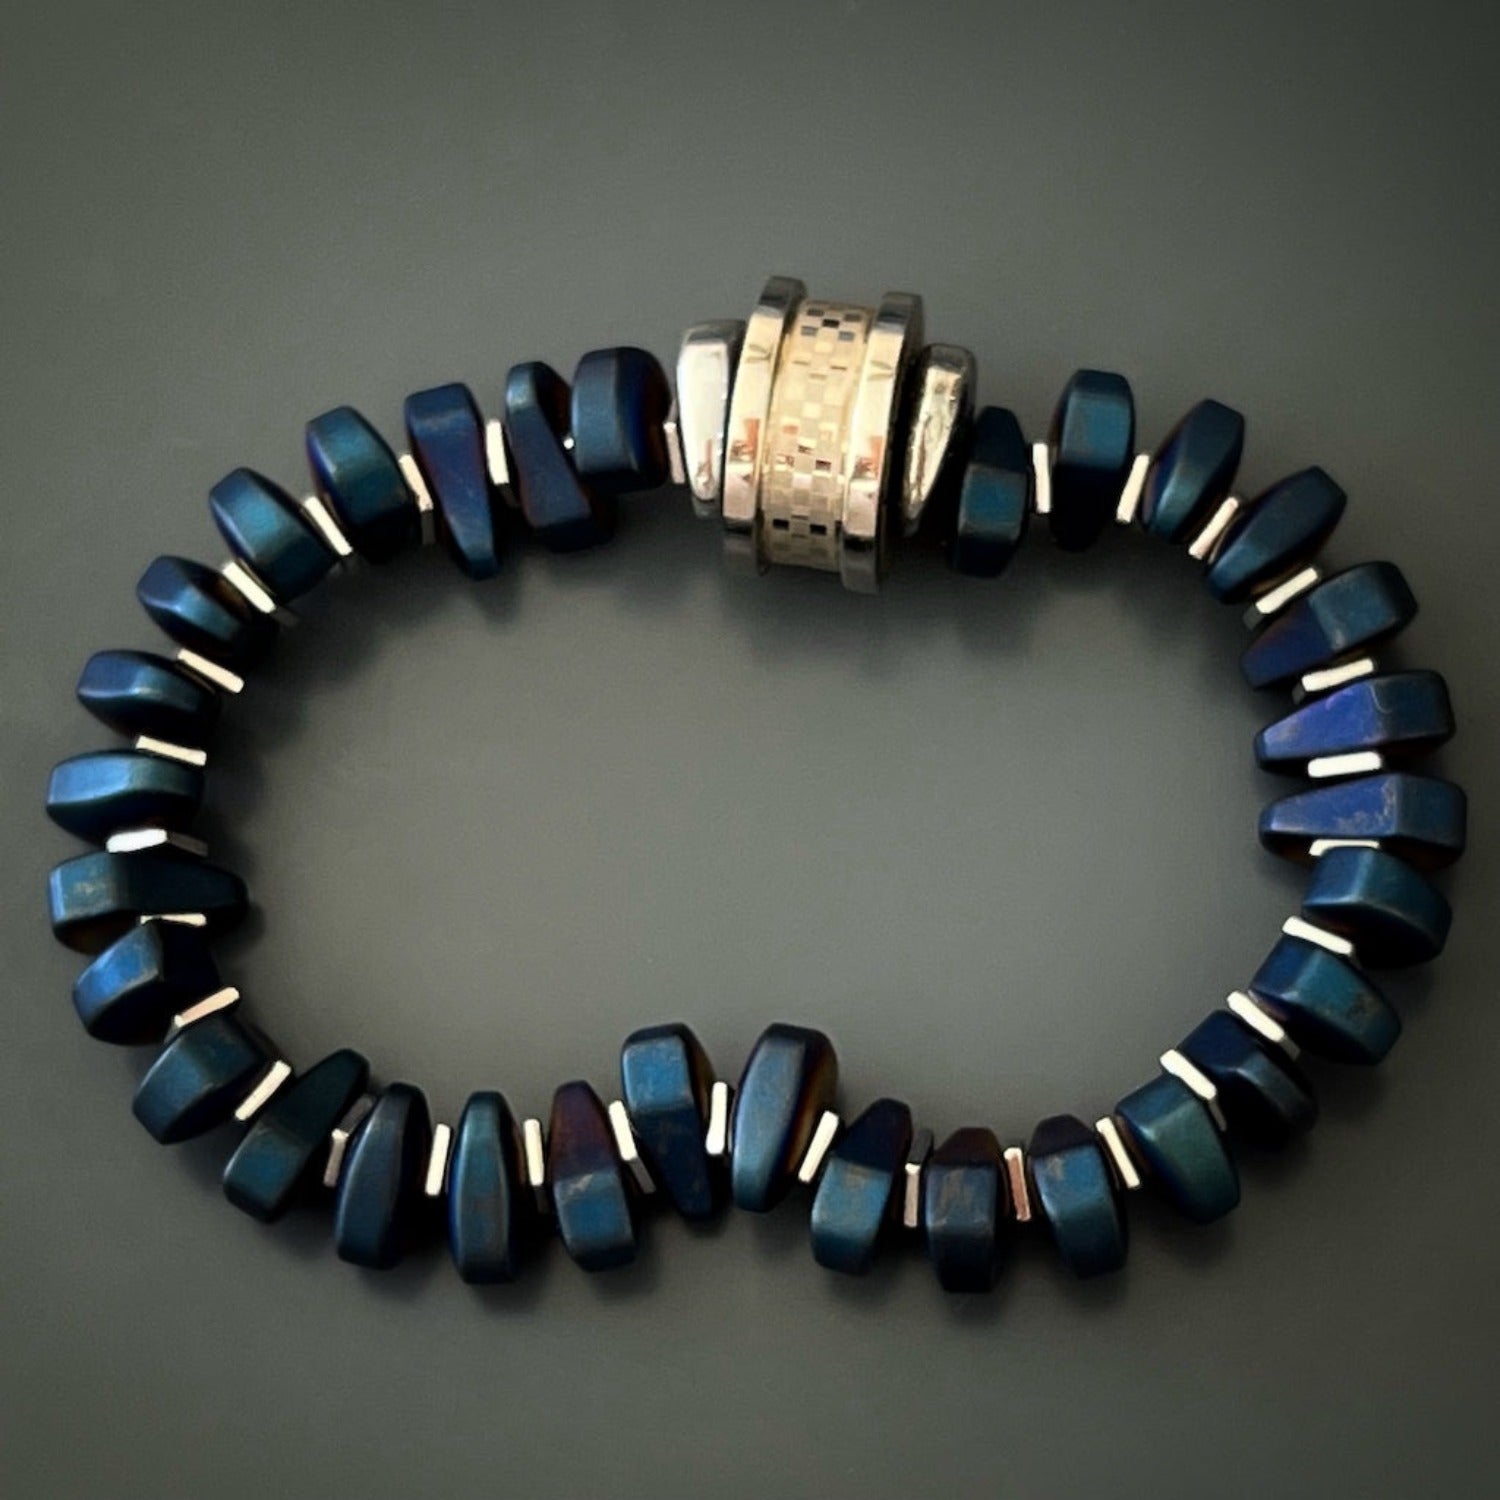 The unique and sleek stainless steel amour charm bead on the Blue Amour Men Bracelet